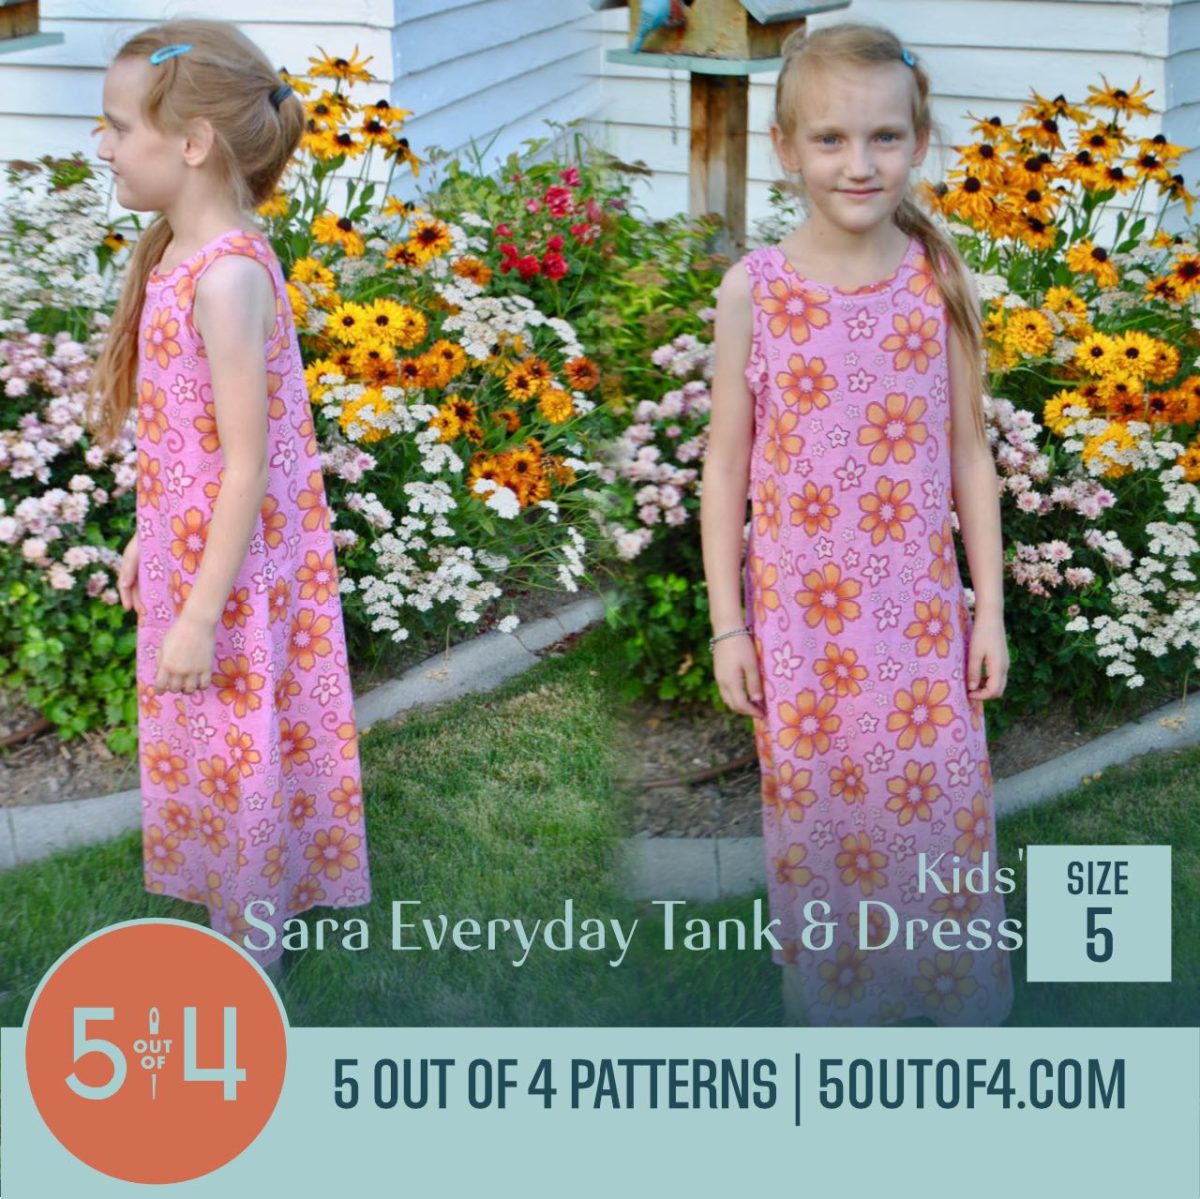 Kids' Sara Everyday Tank and Dress - 5 out of 4 Patterns